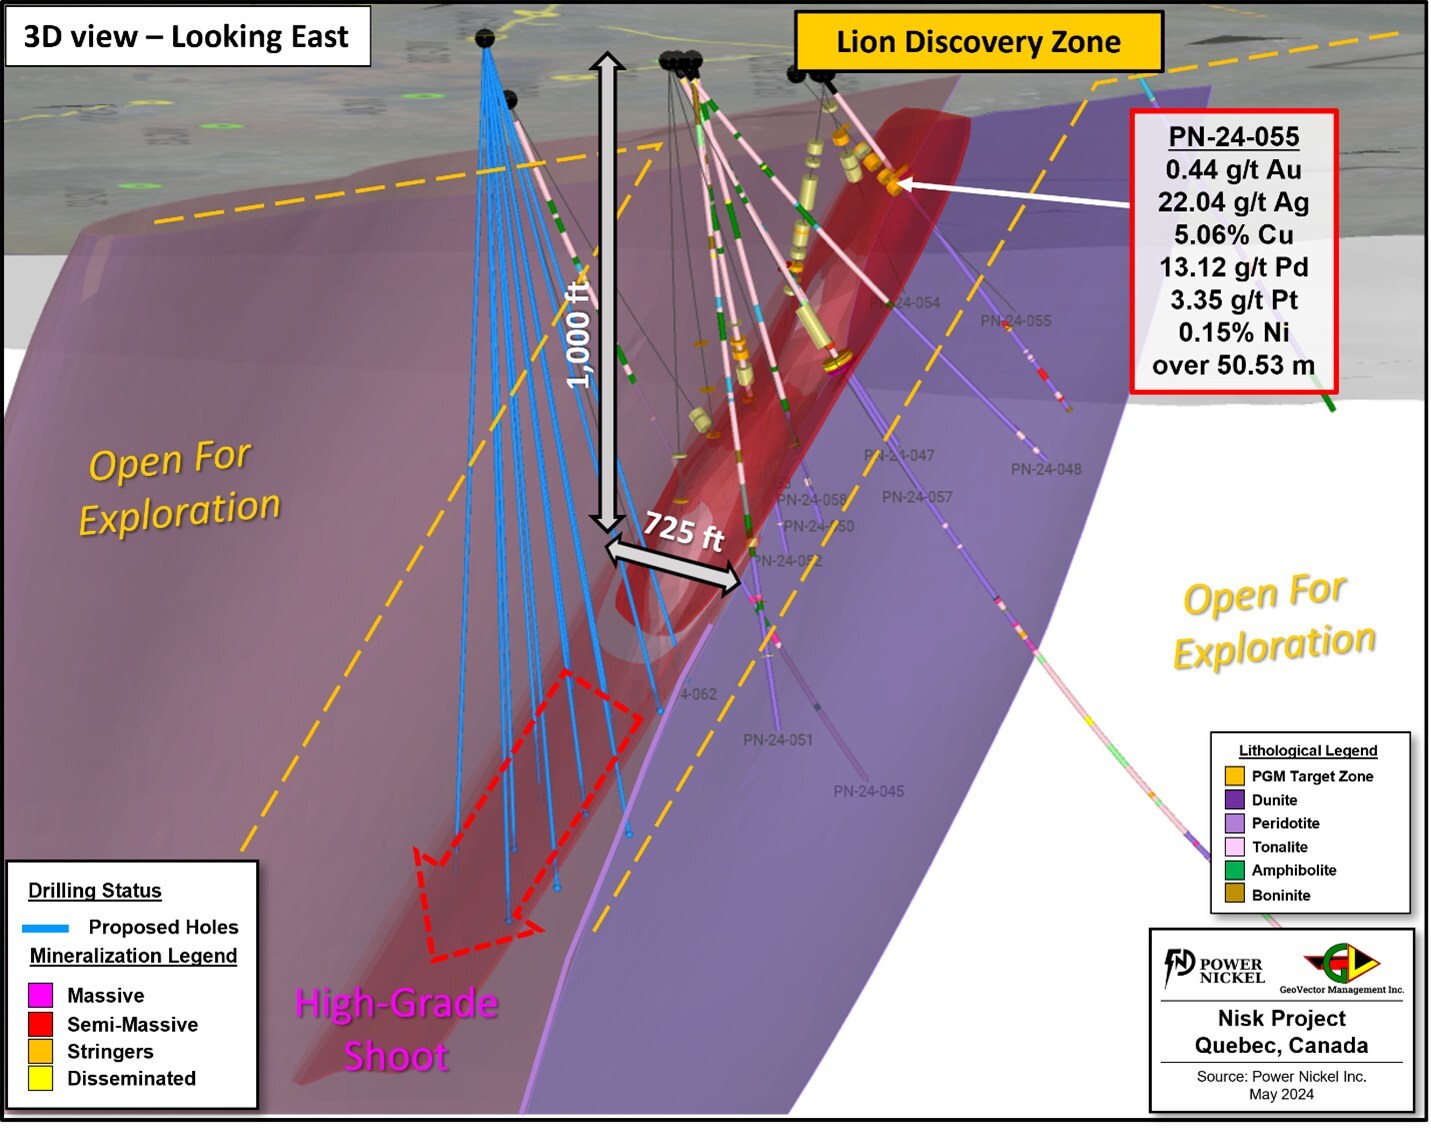 Figure 3: 3D view of the extent of drilling at Lion Discovery including results from the latest assays and proposed drillings for the next summer program.